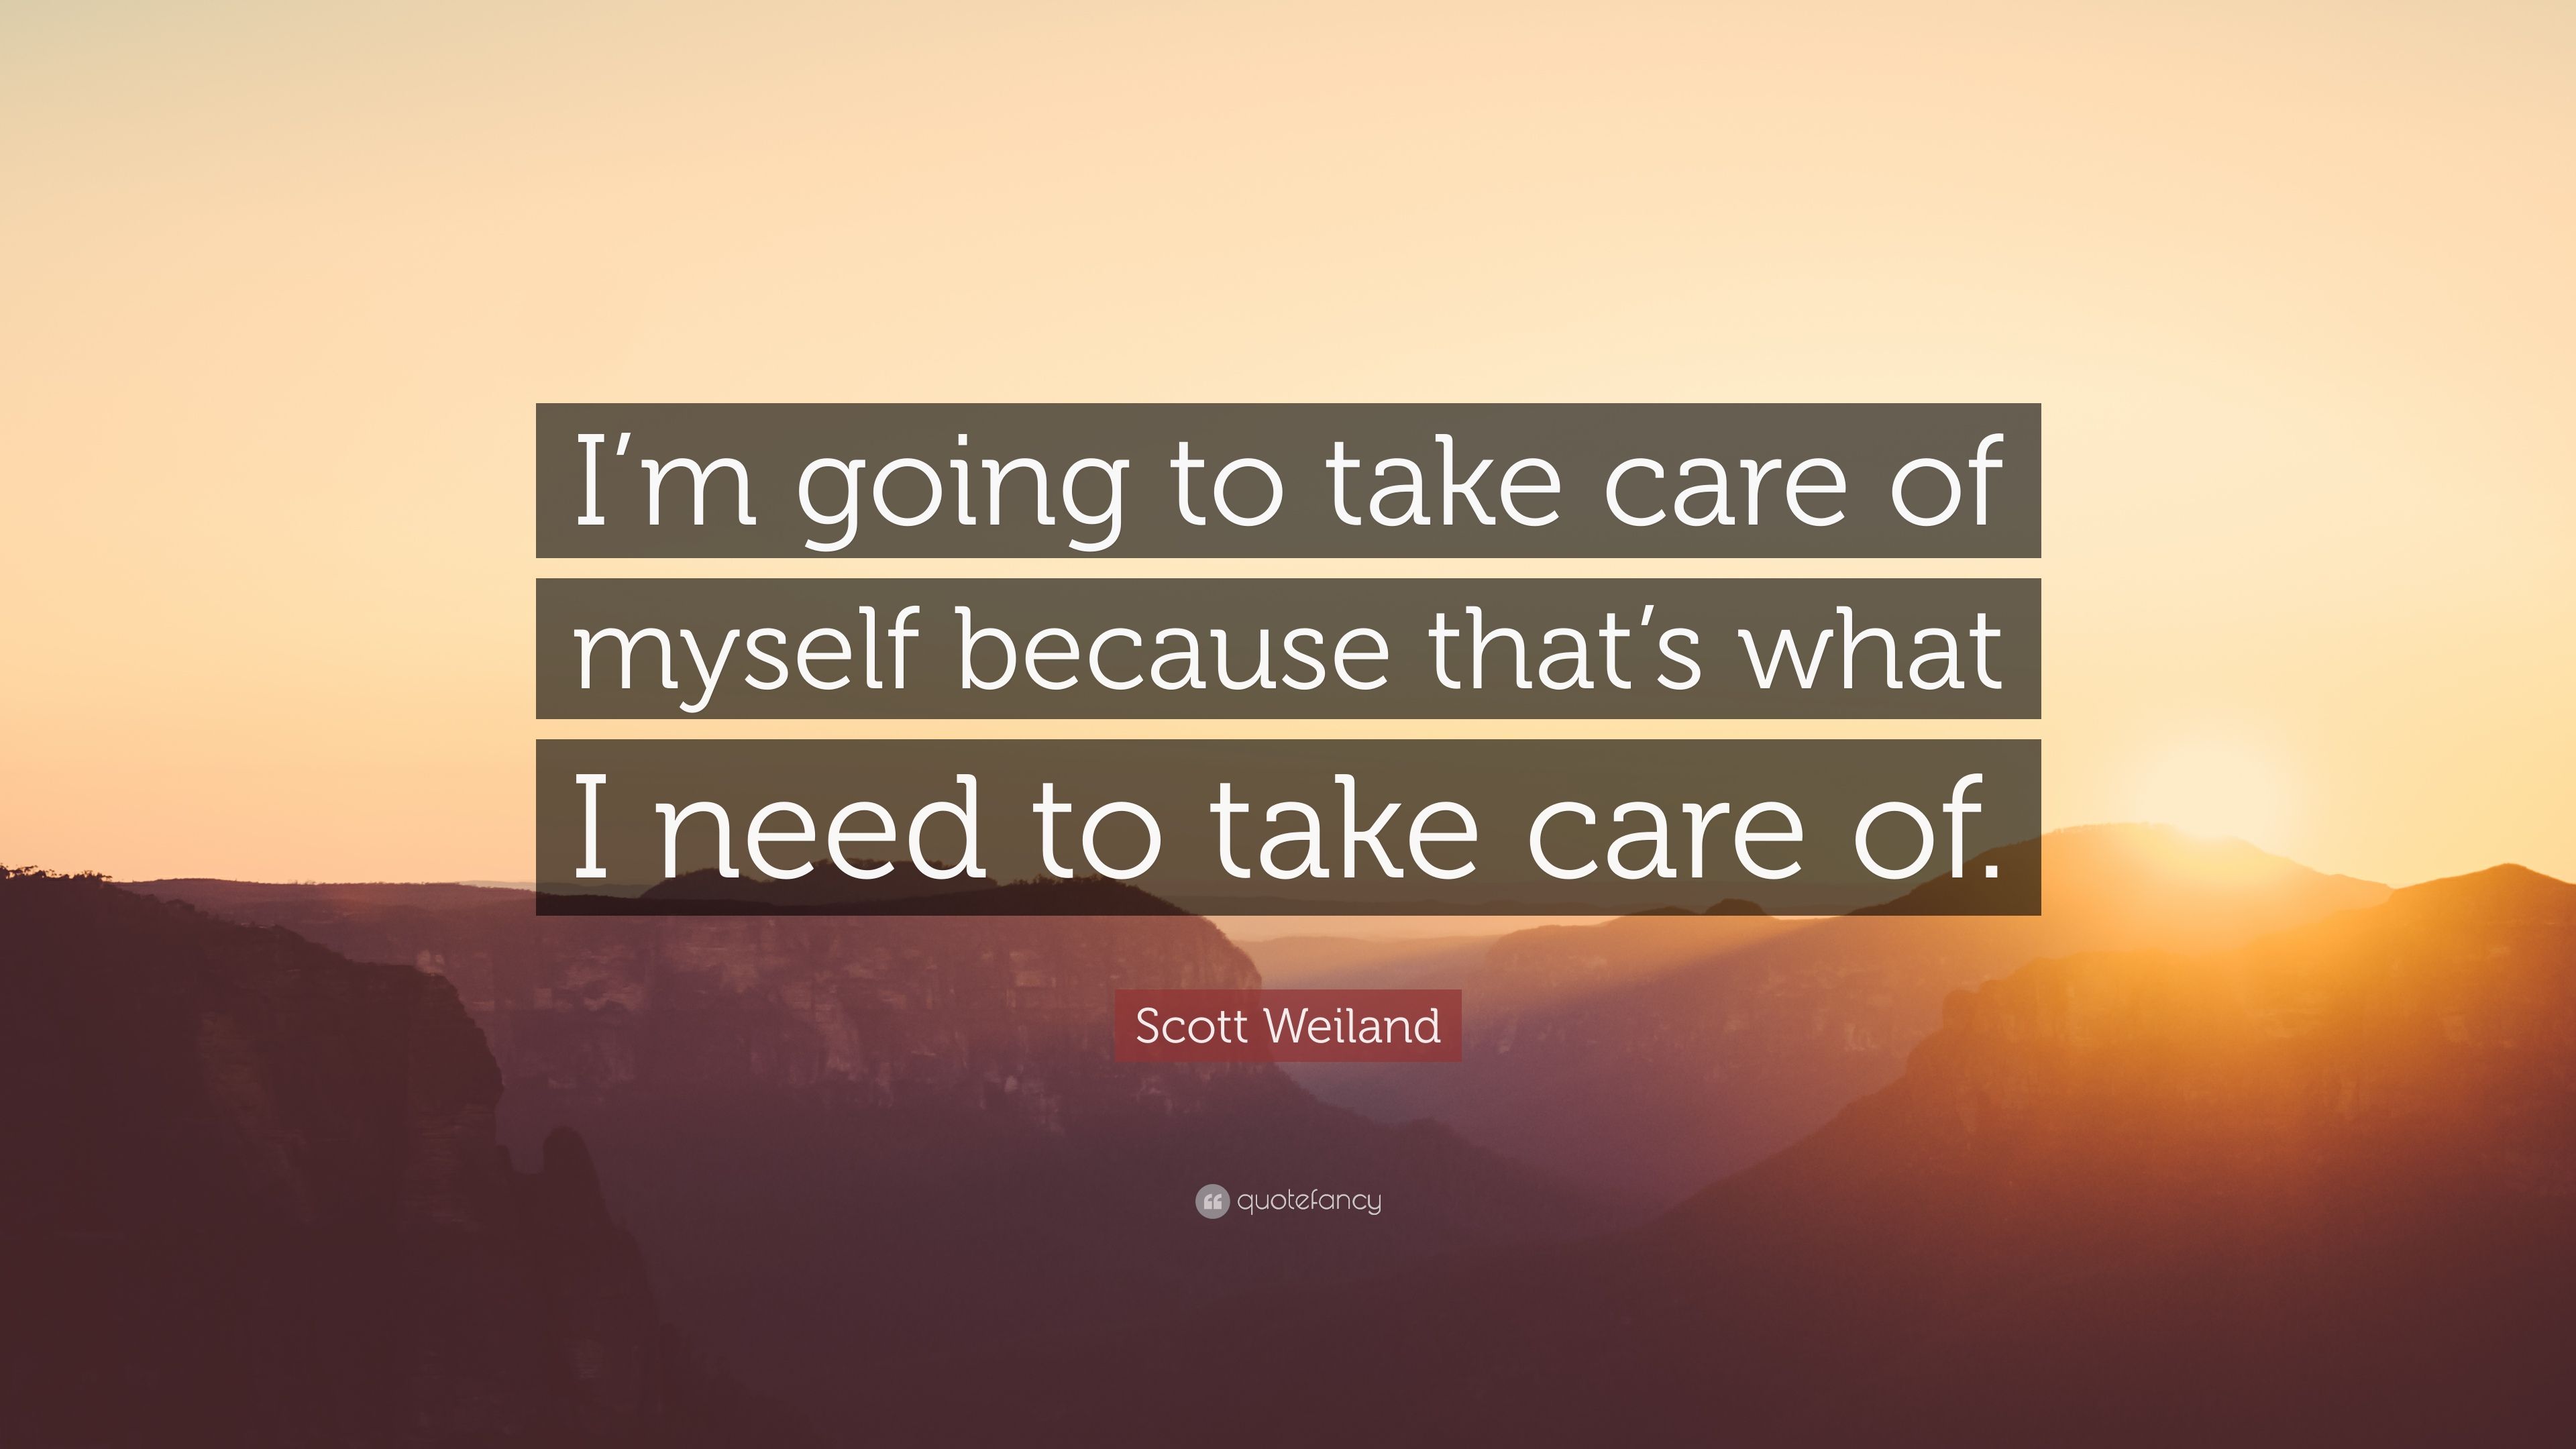 Scott Weiland Quote: “I'm going to take care of myself because